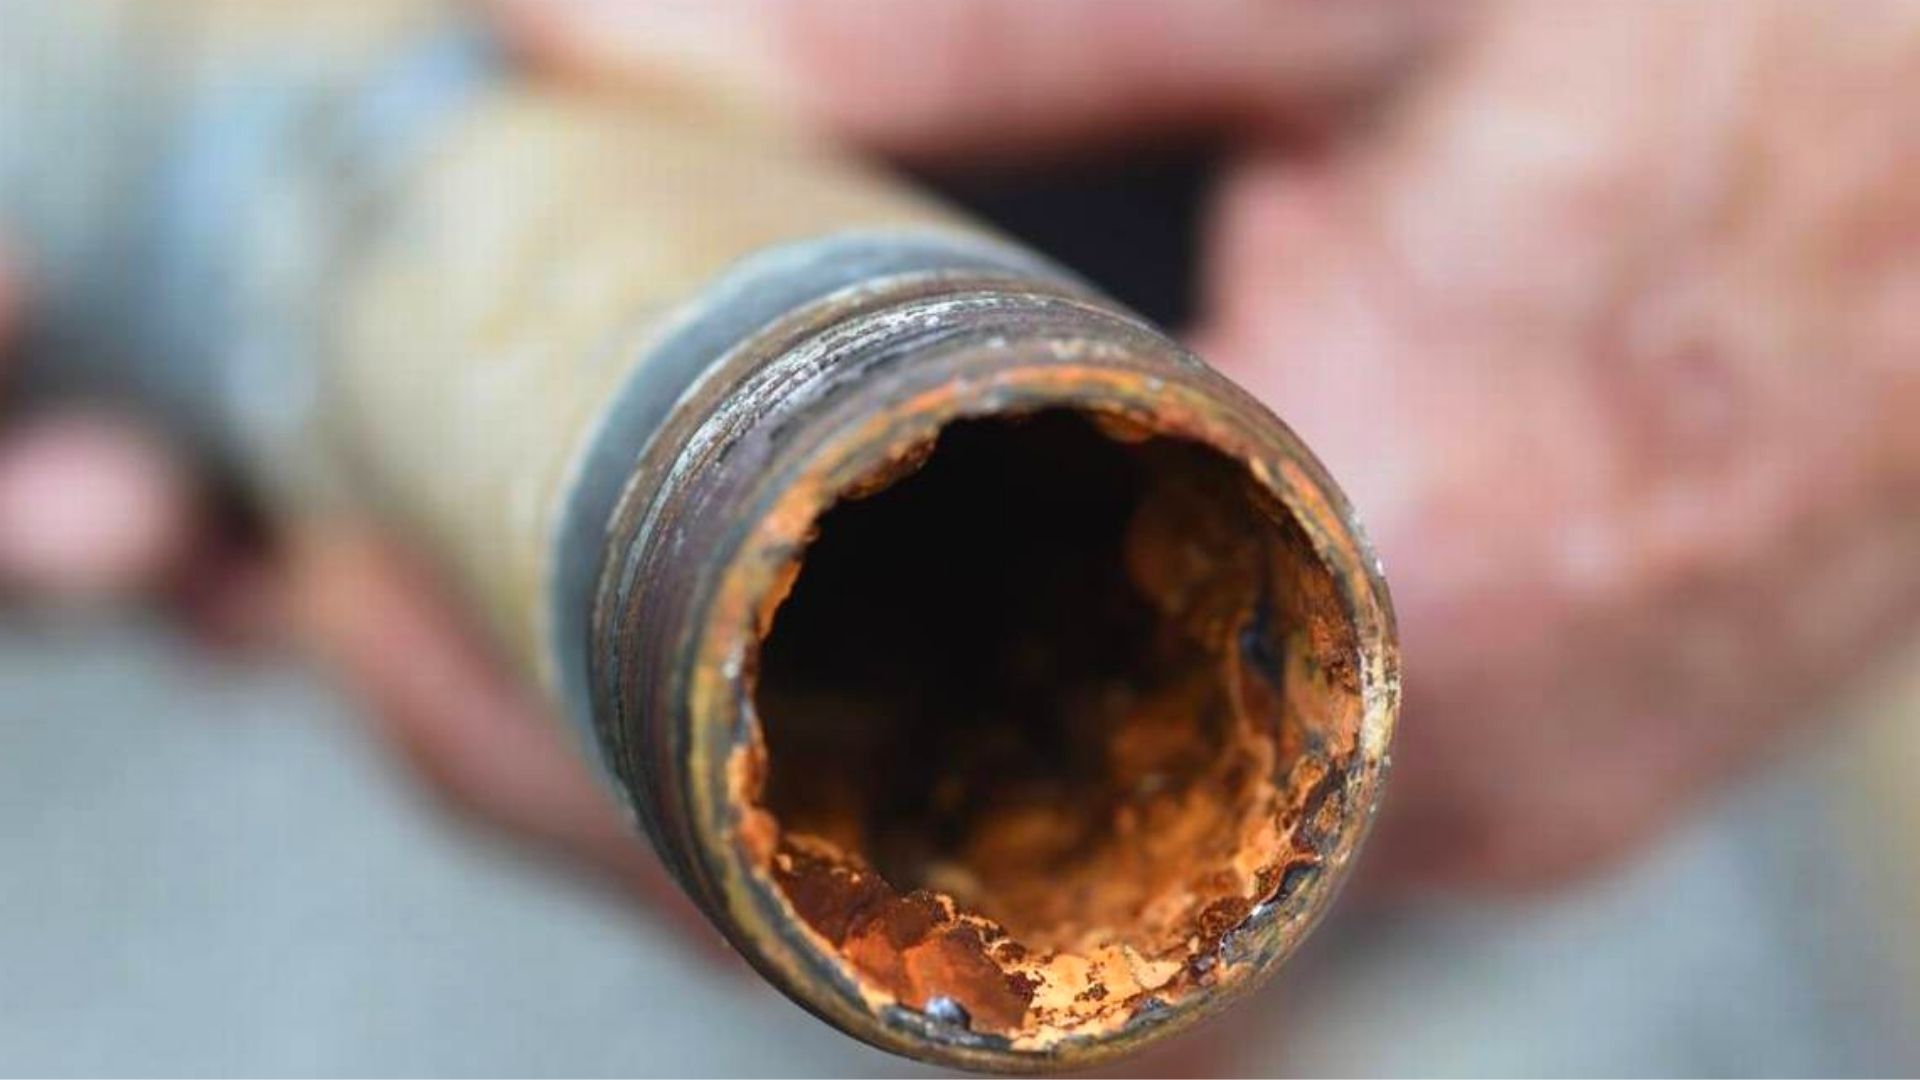 https://goldcoastplumbingcompany.com.au/wp-content/uploads/2022/04/rusted-pipe-held-close-up-to-camera.jpg